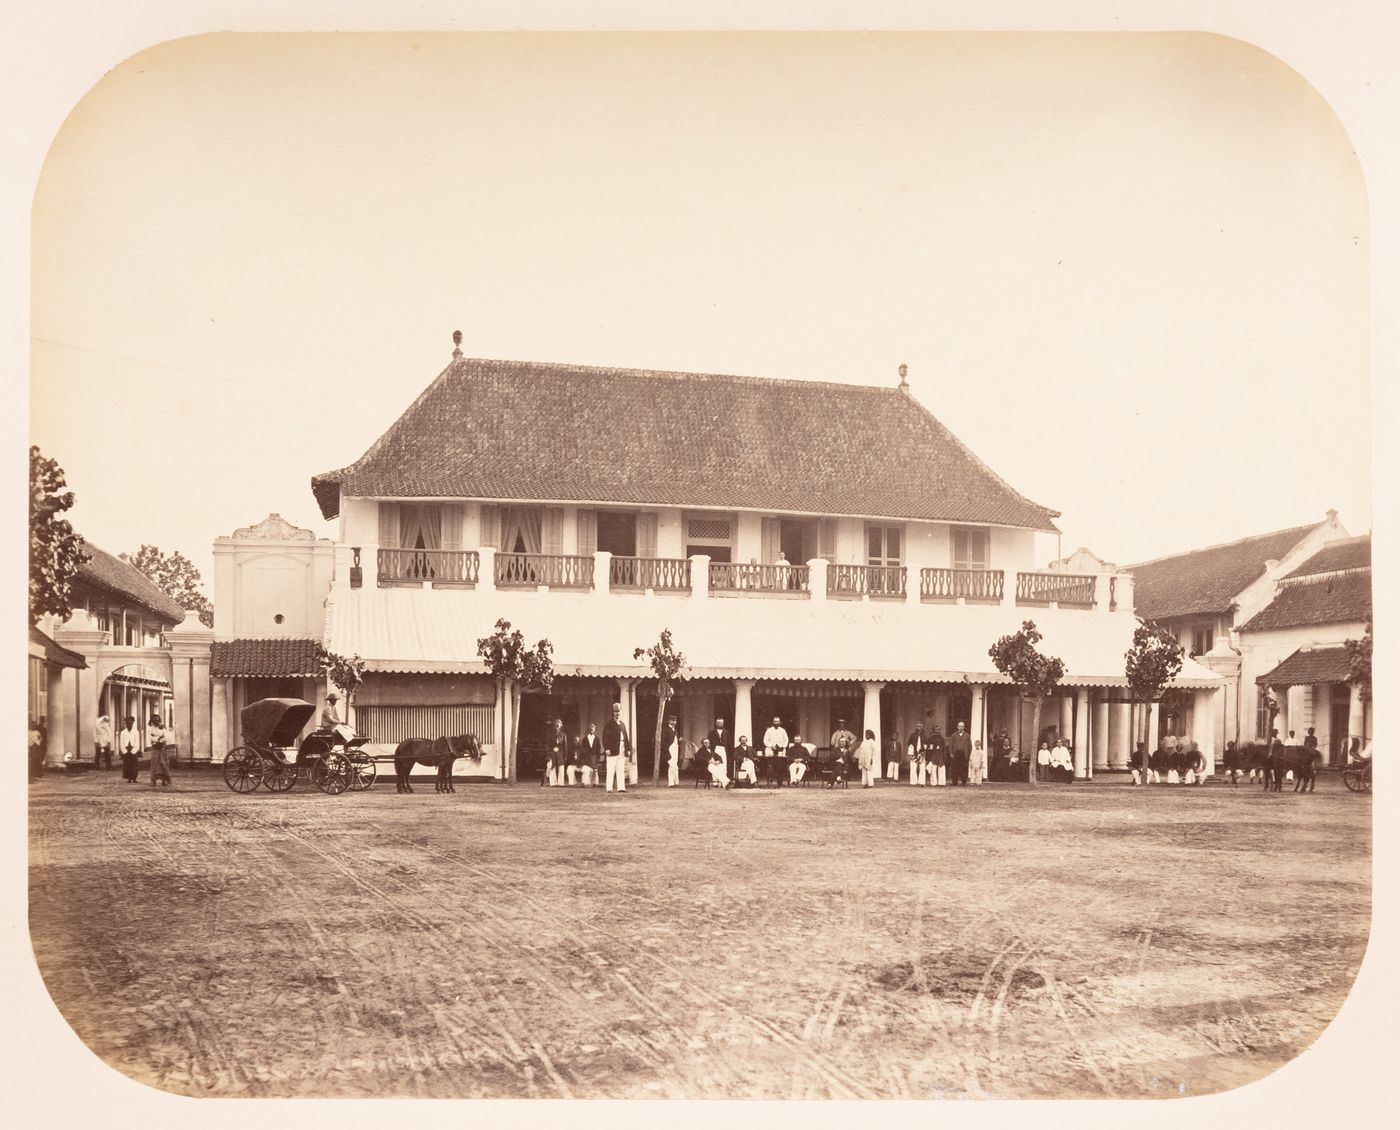 View of buildings and a square showing a carriage and people, Semarang, Dutch East Indies (now Indonesia)